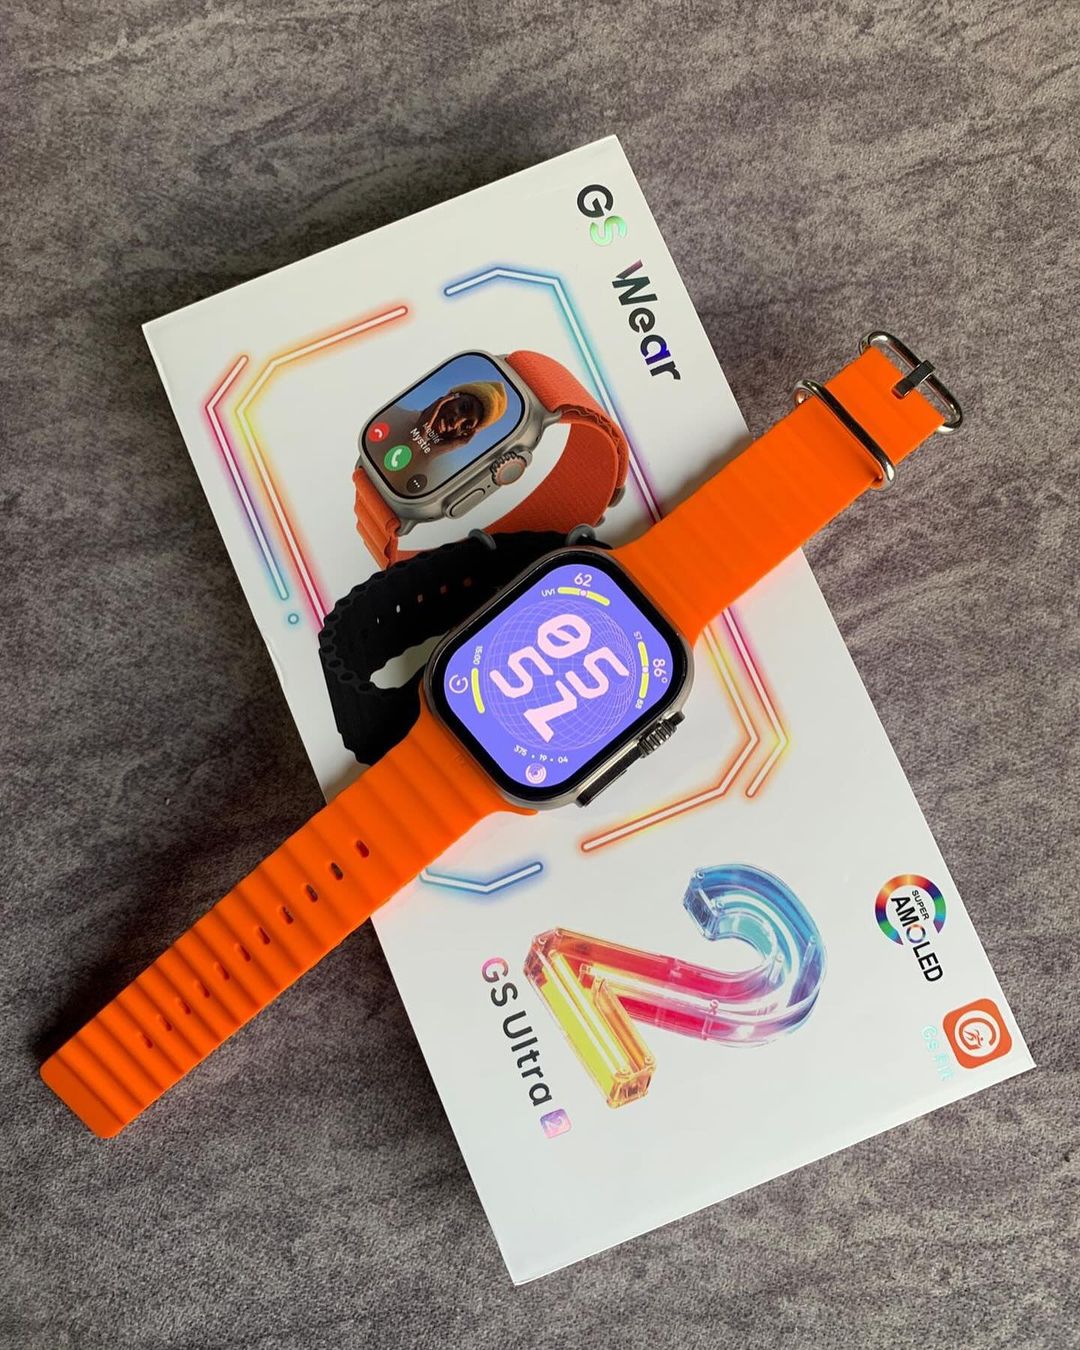 HK9 ultra2 gen2 smartwatch. Welcome to another in-depth review of